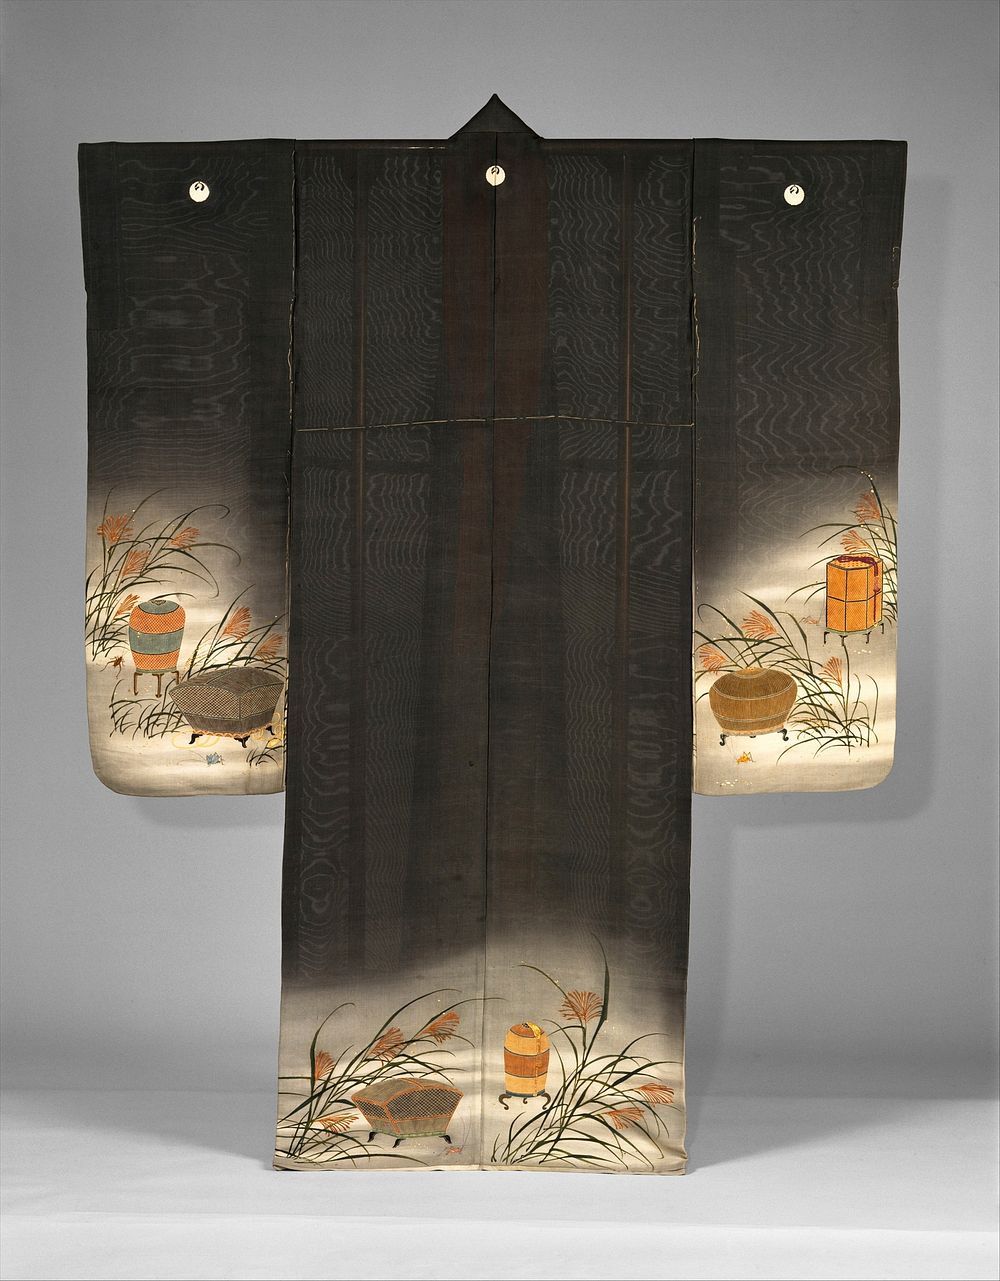 Unlined Summer Kimono (Hito-e) with Crickets, Grasshoppers, Cricket Cages, and Pampas Grass, Japan